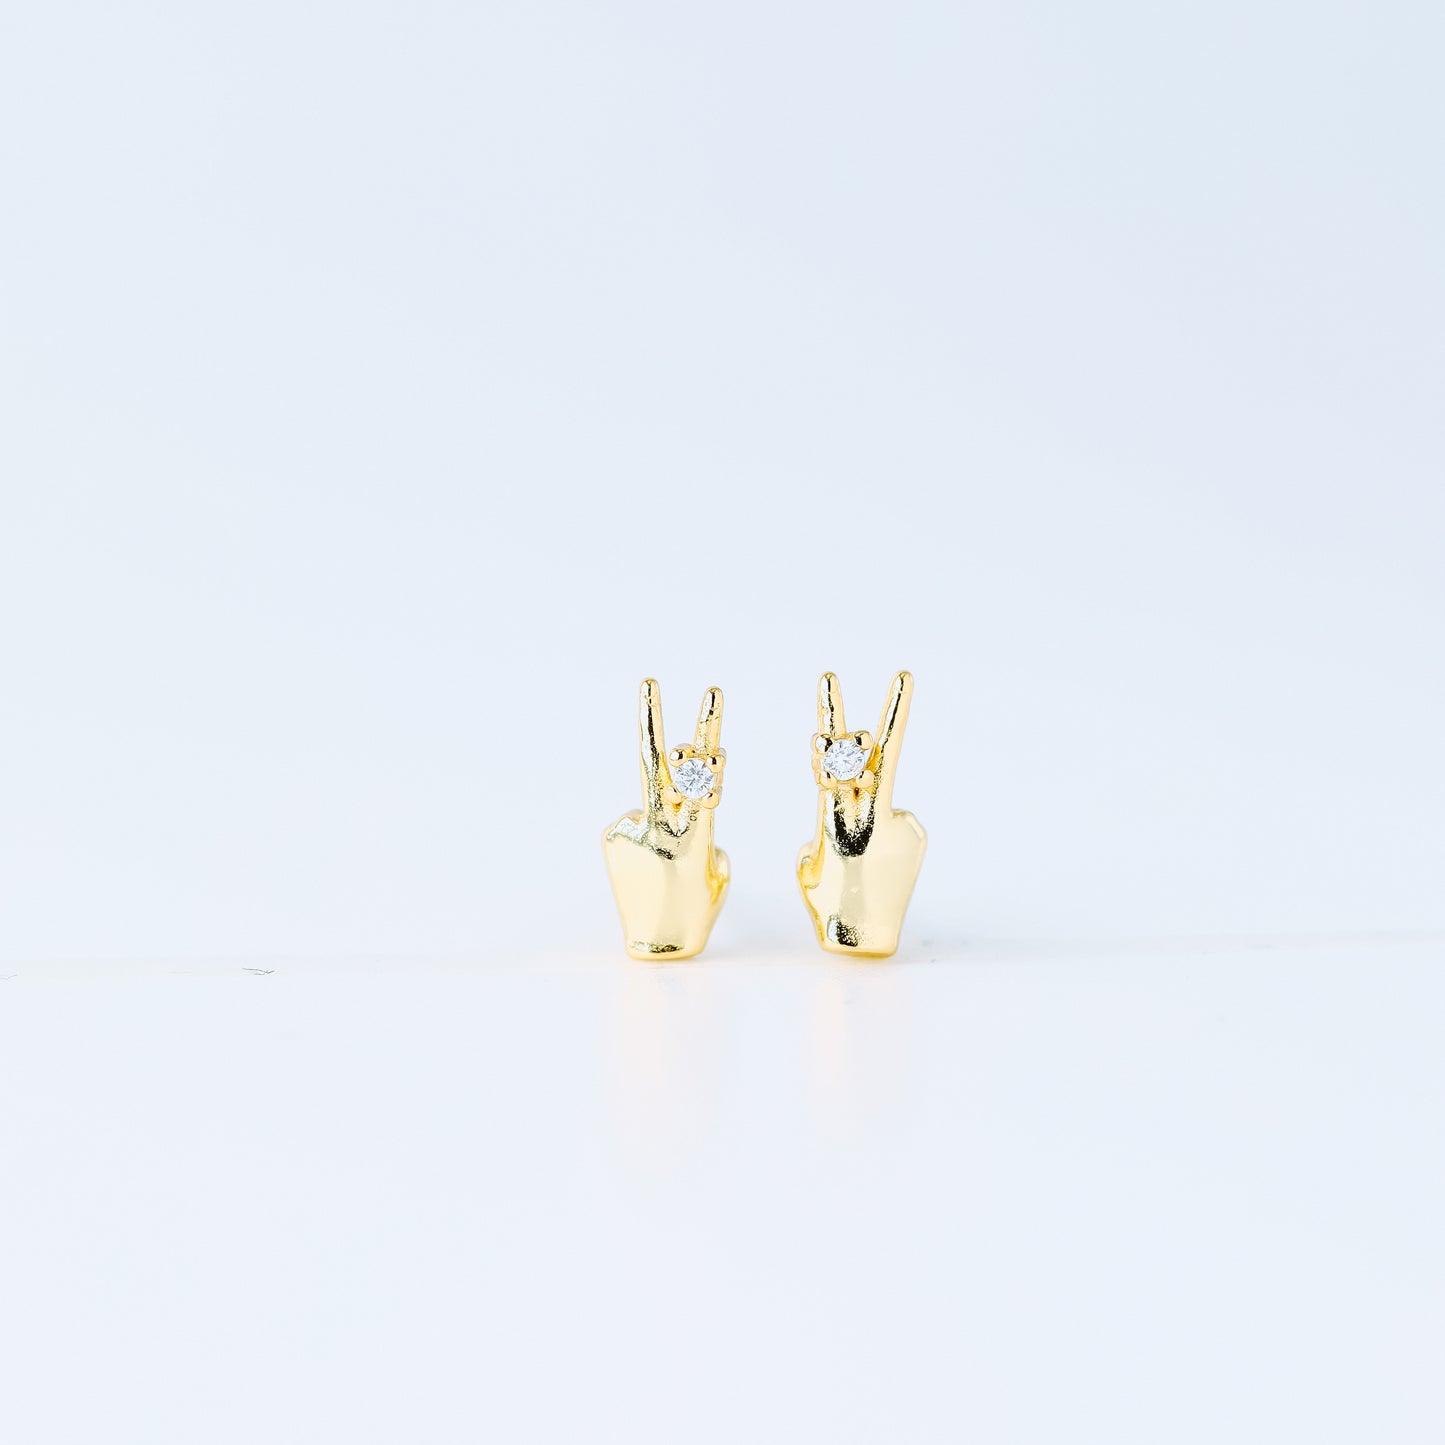 Victory Hand Earrings, V Earrings, Fighting, Peace Sign Earrings, Peace Fingers, Gift for Her, Sold Individually, BYSDMJEWELS